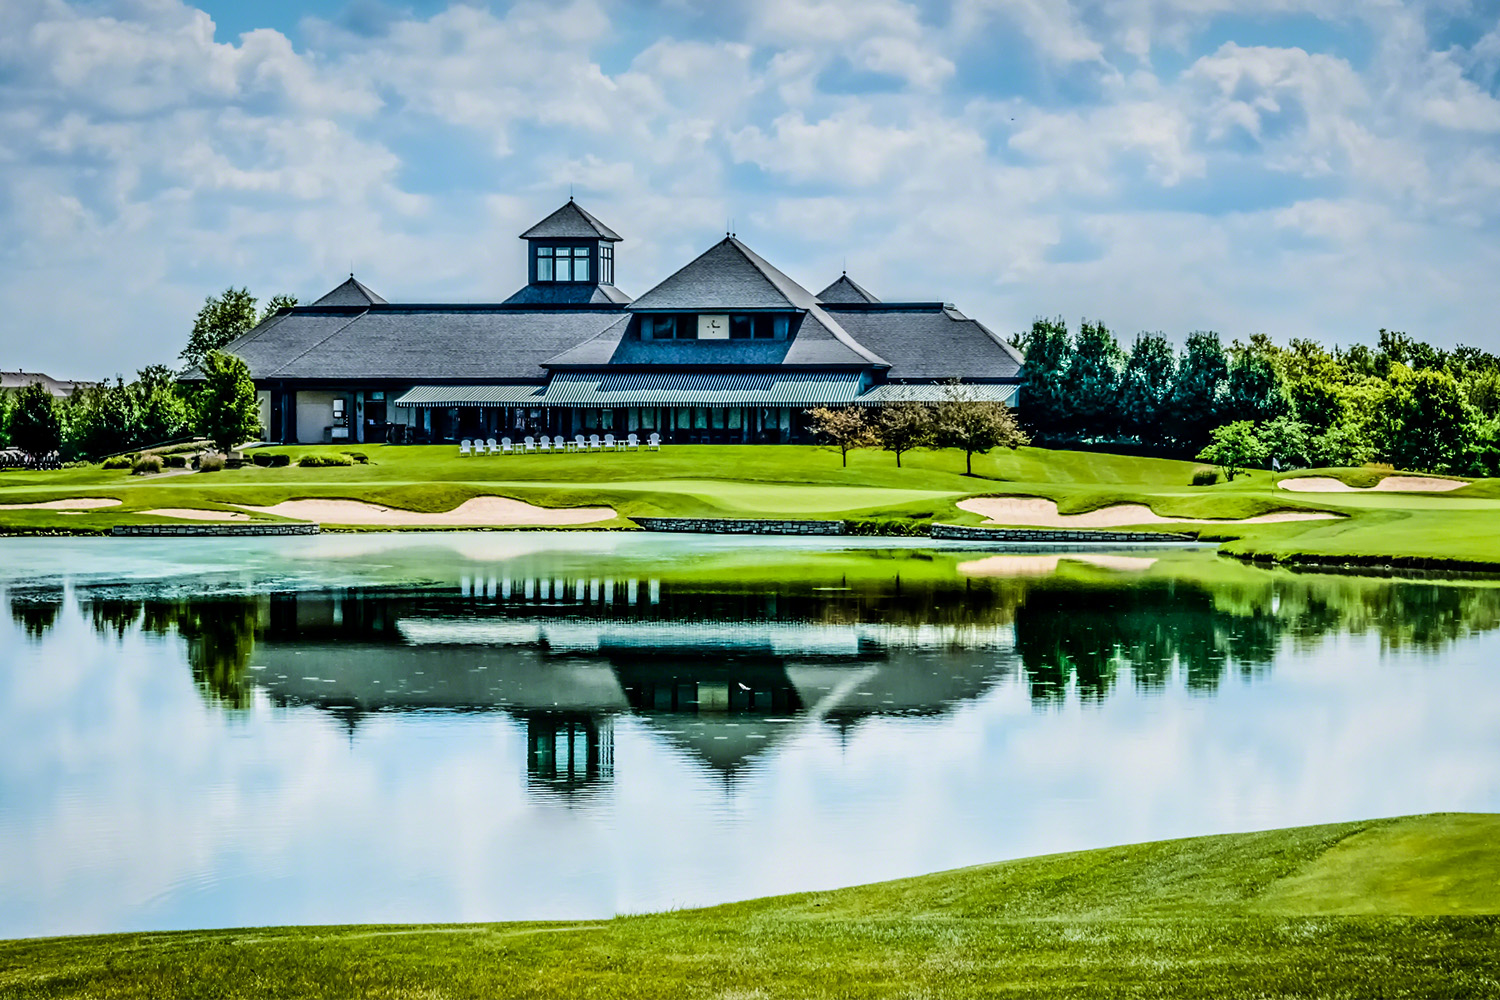 Arcis Golf Buys 9th Country Club This Year￼